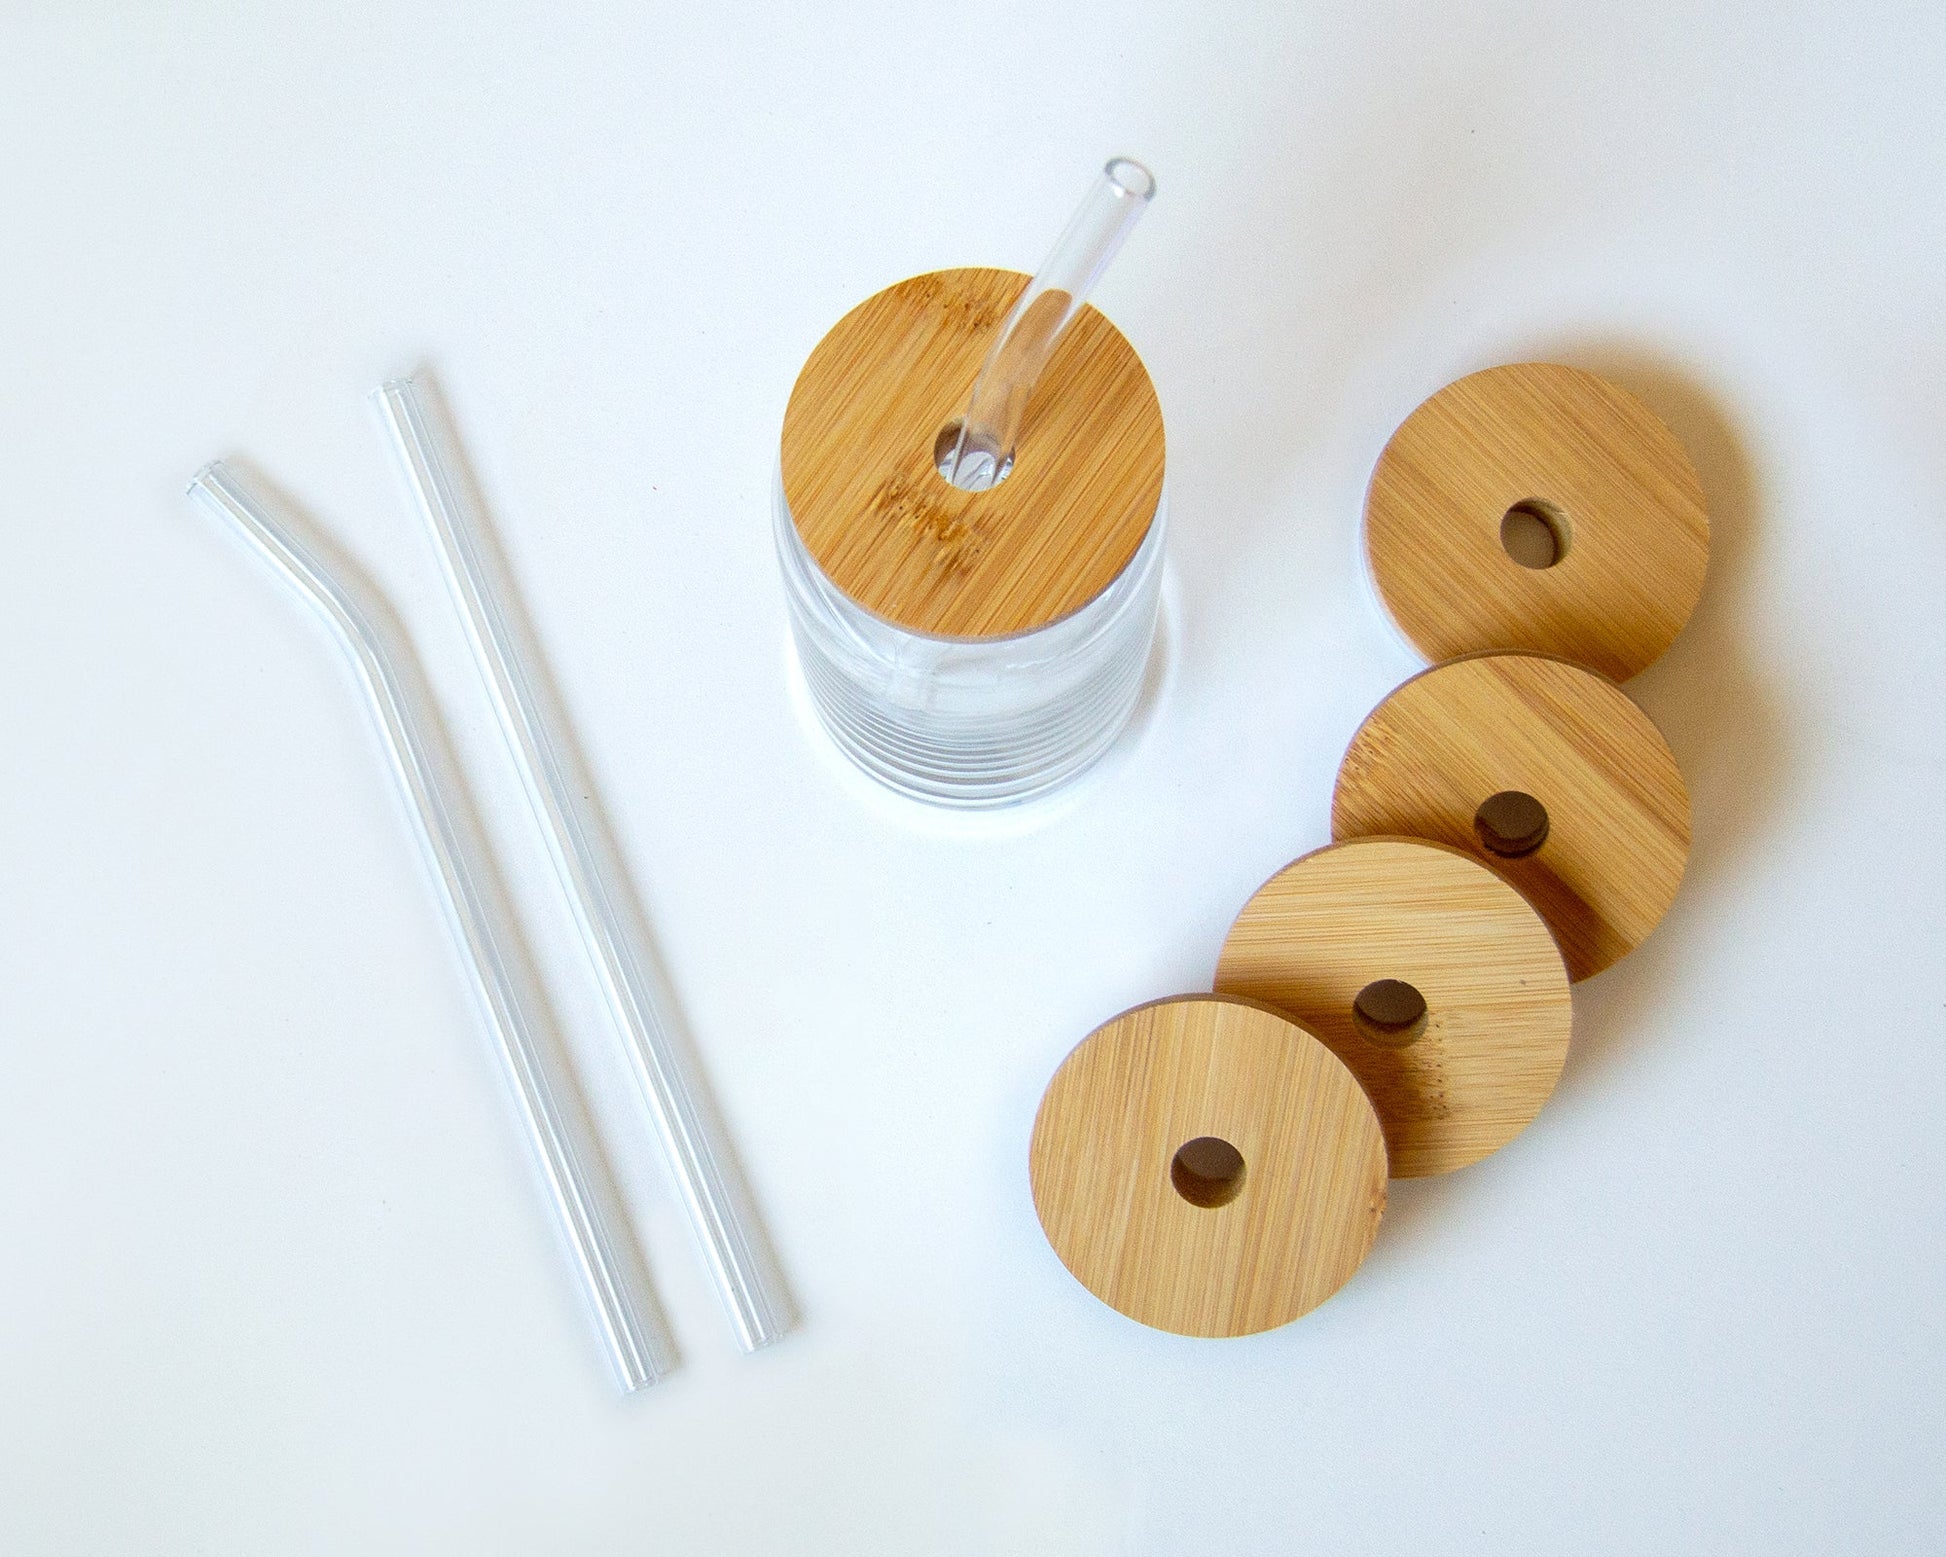 Bamboo Lid Care Kit